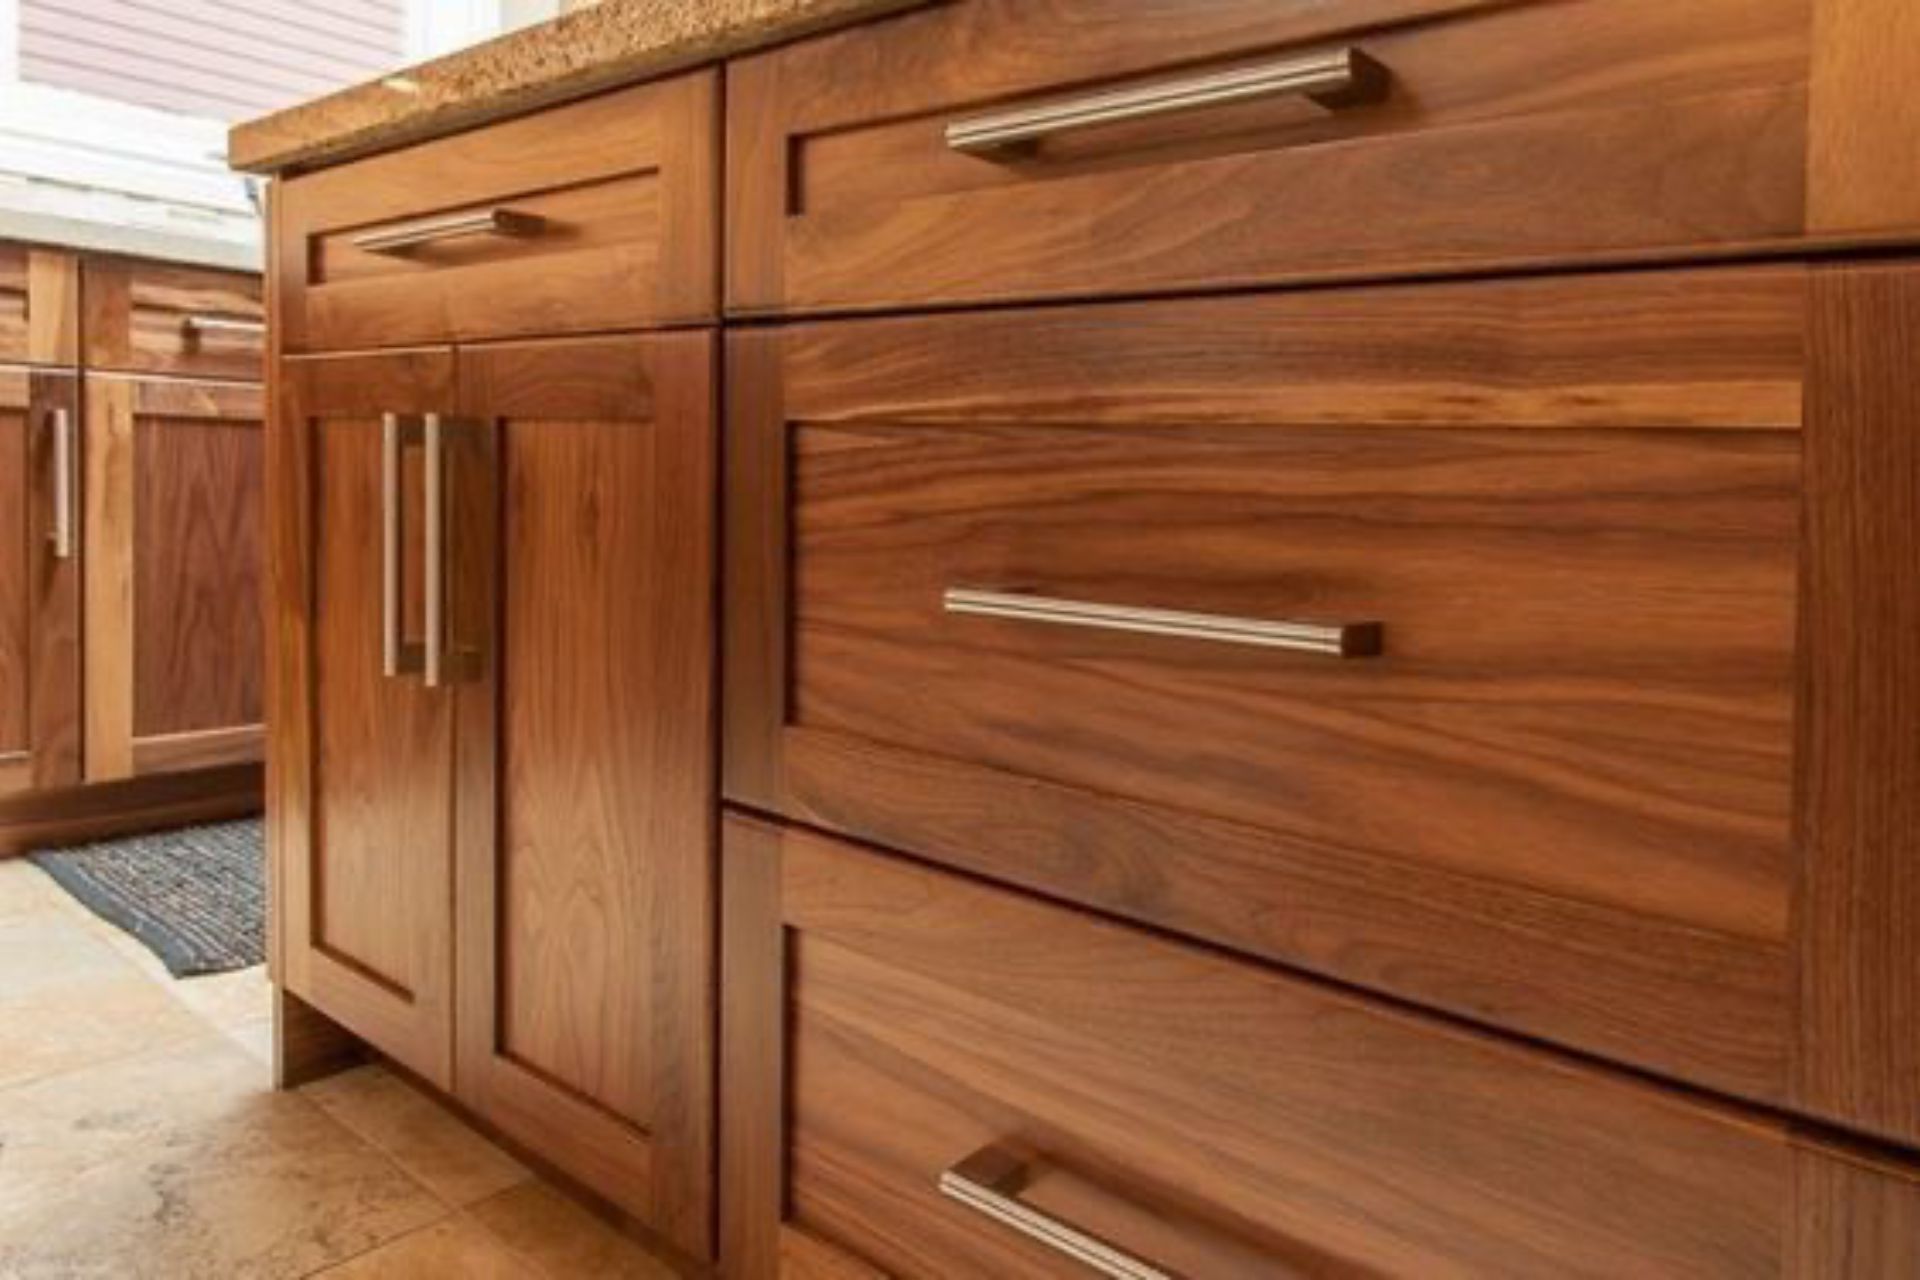 Shaker Walnut Kitchen Cabinets: A Timeless Classic for Your Kitchen